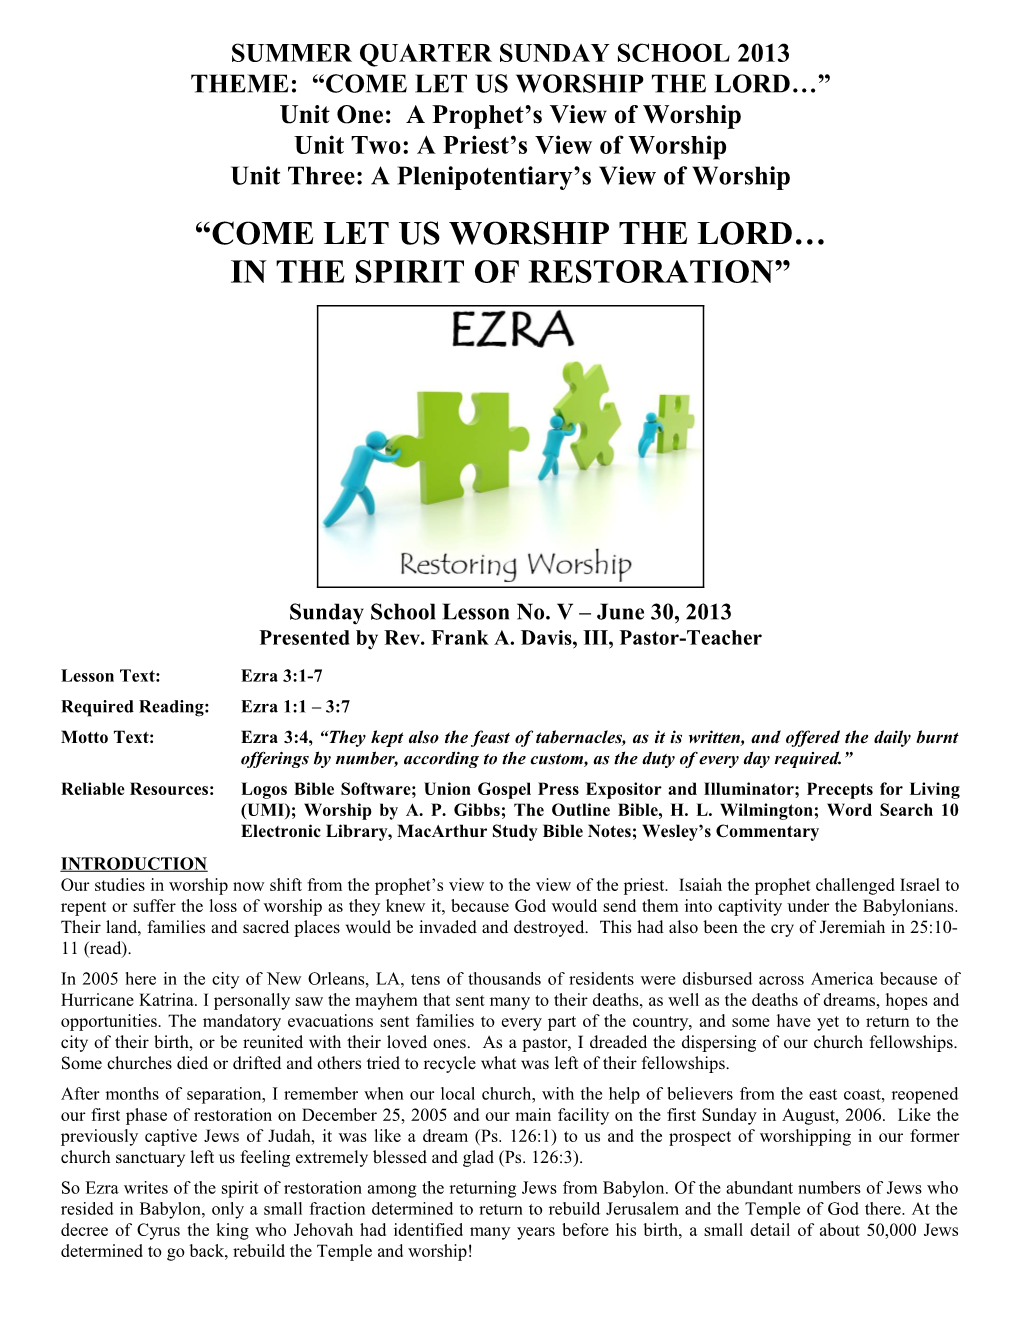 Theme: Come Let Us Worship the Lord s2